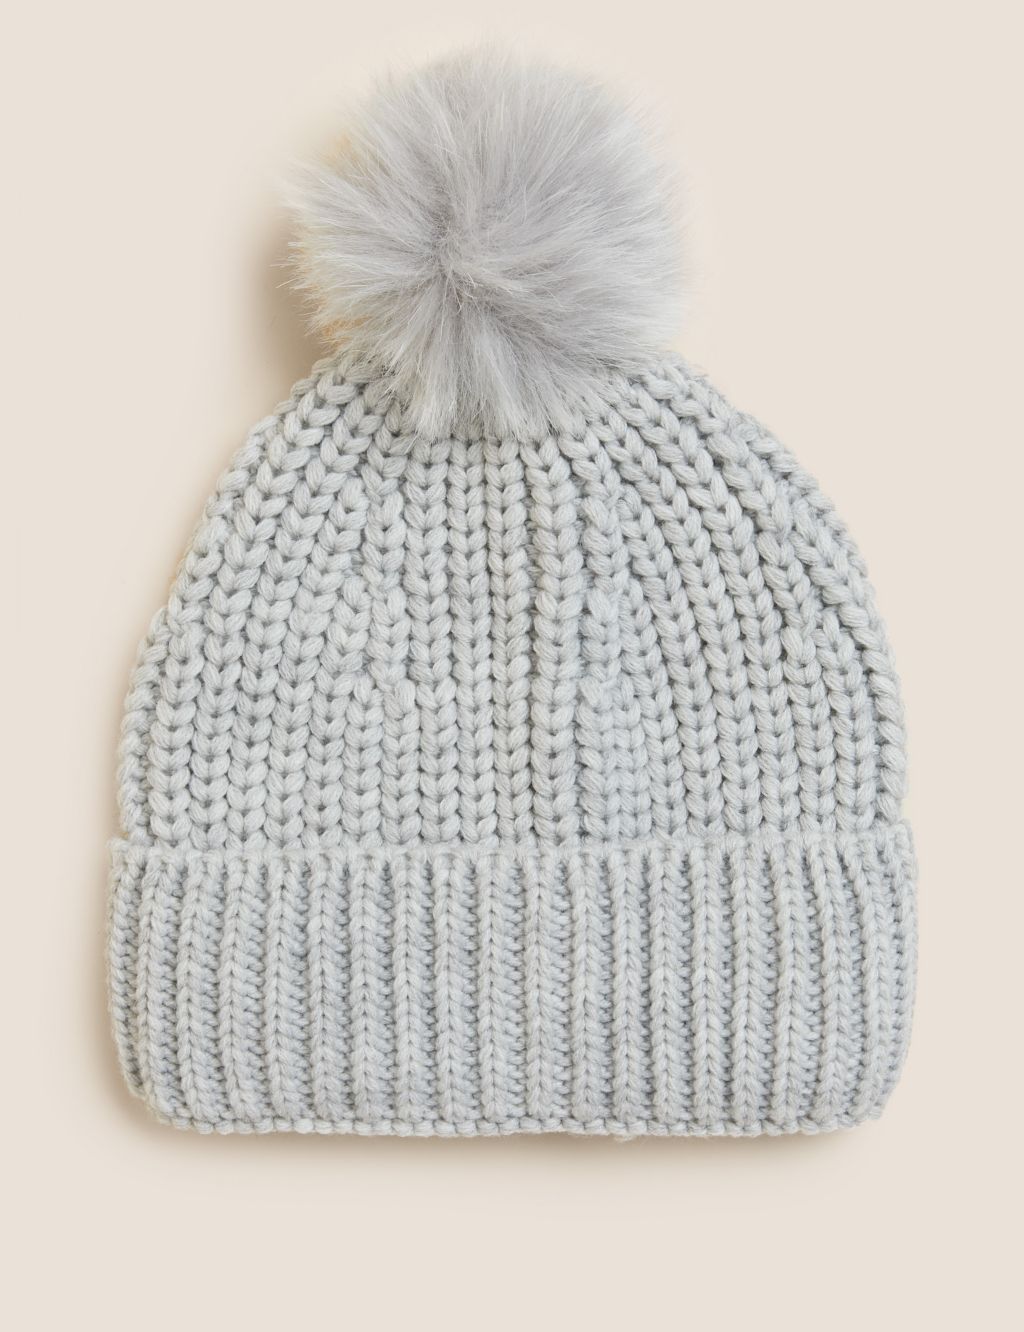 Knitted Faux Fur Pom Hat image 1